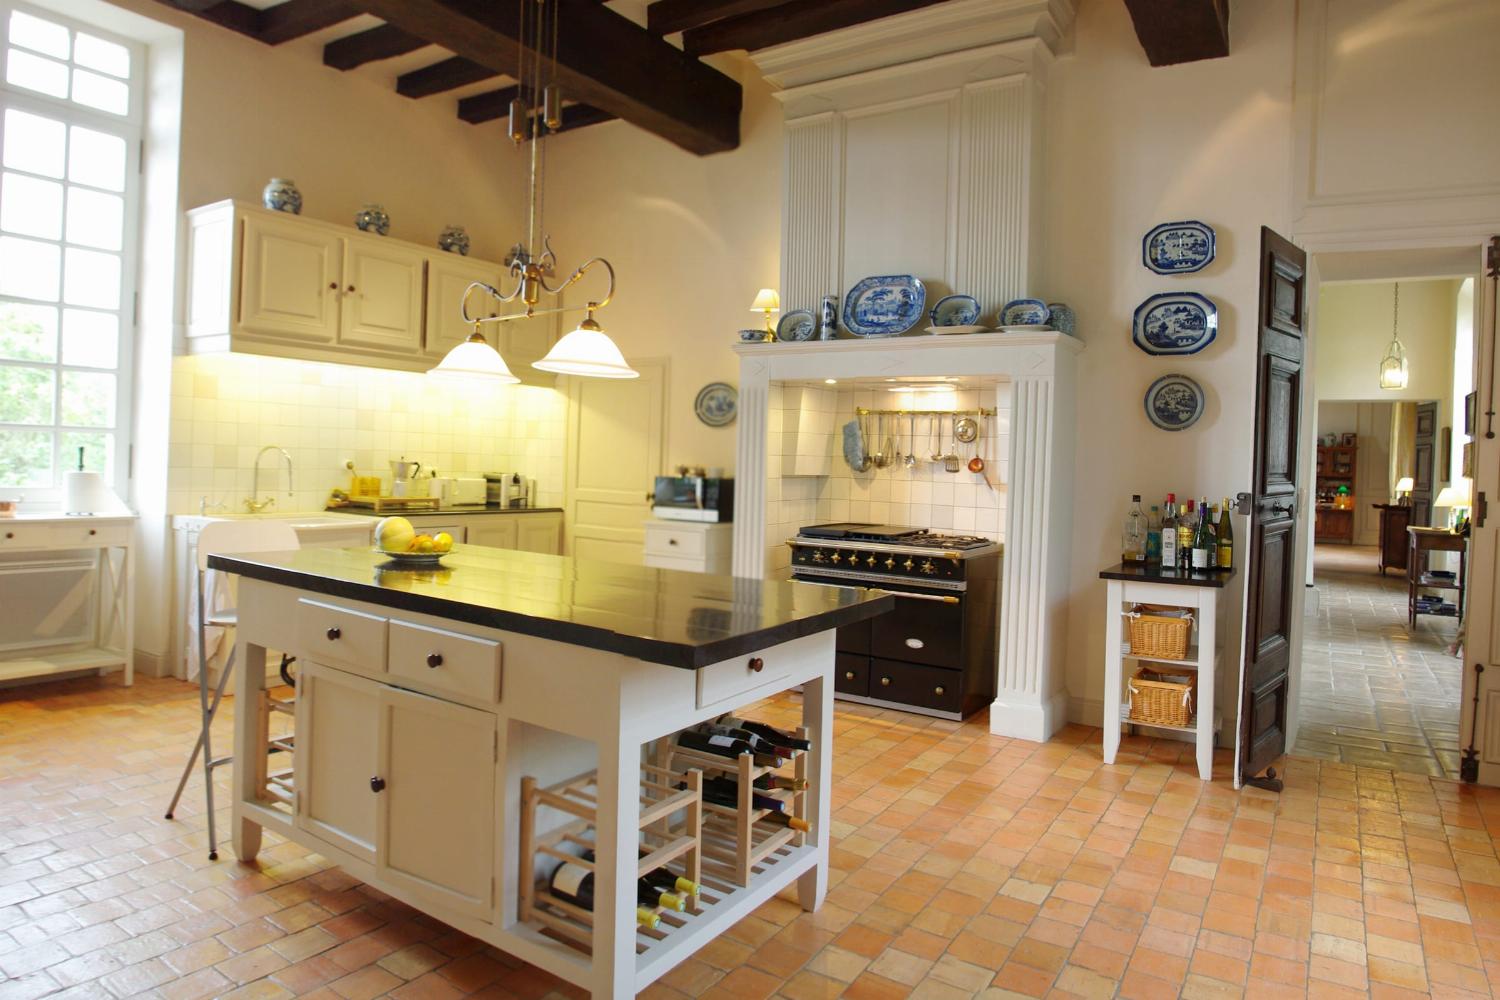 Kitchen | Holiday accommodation in the Loire Valley